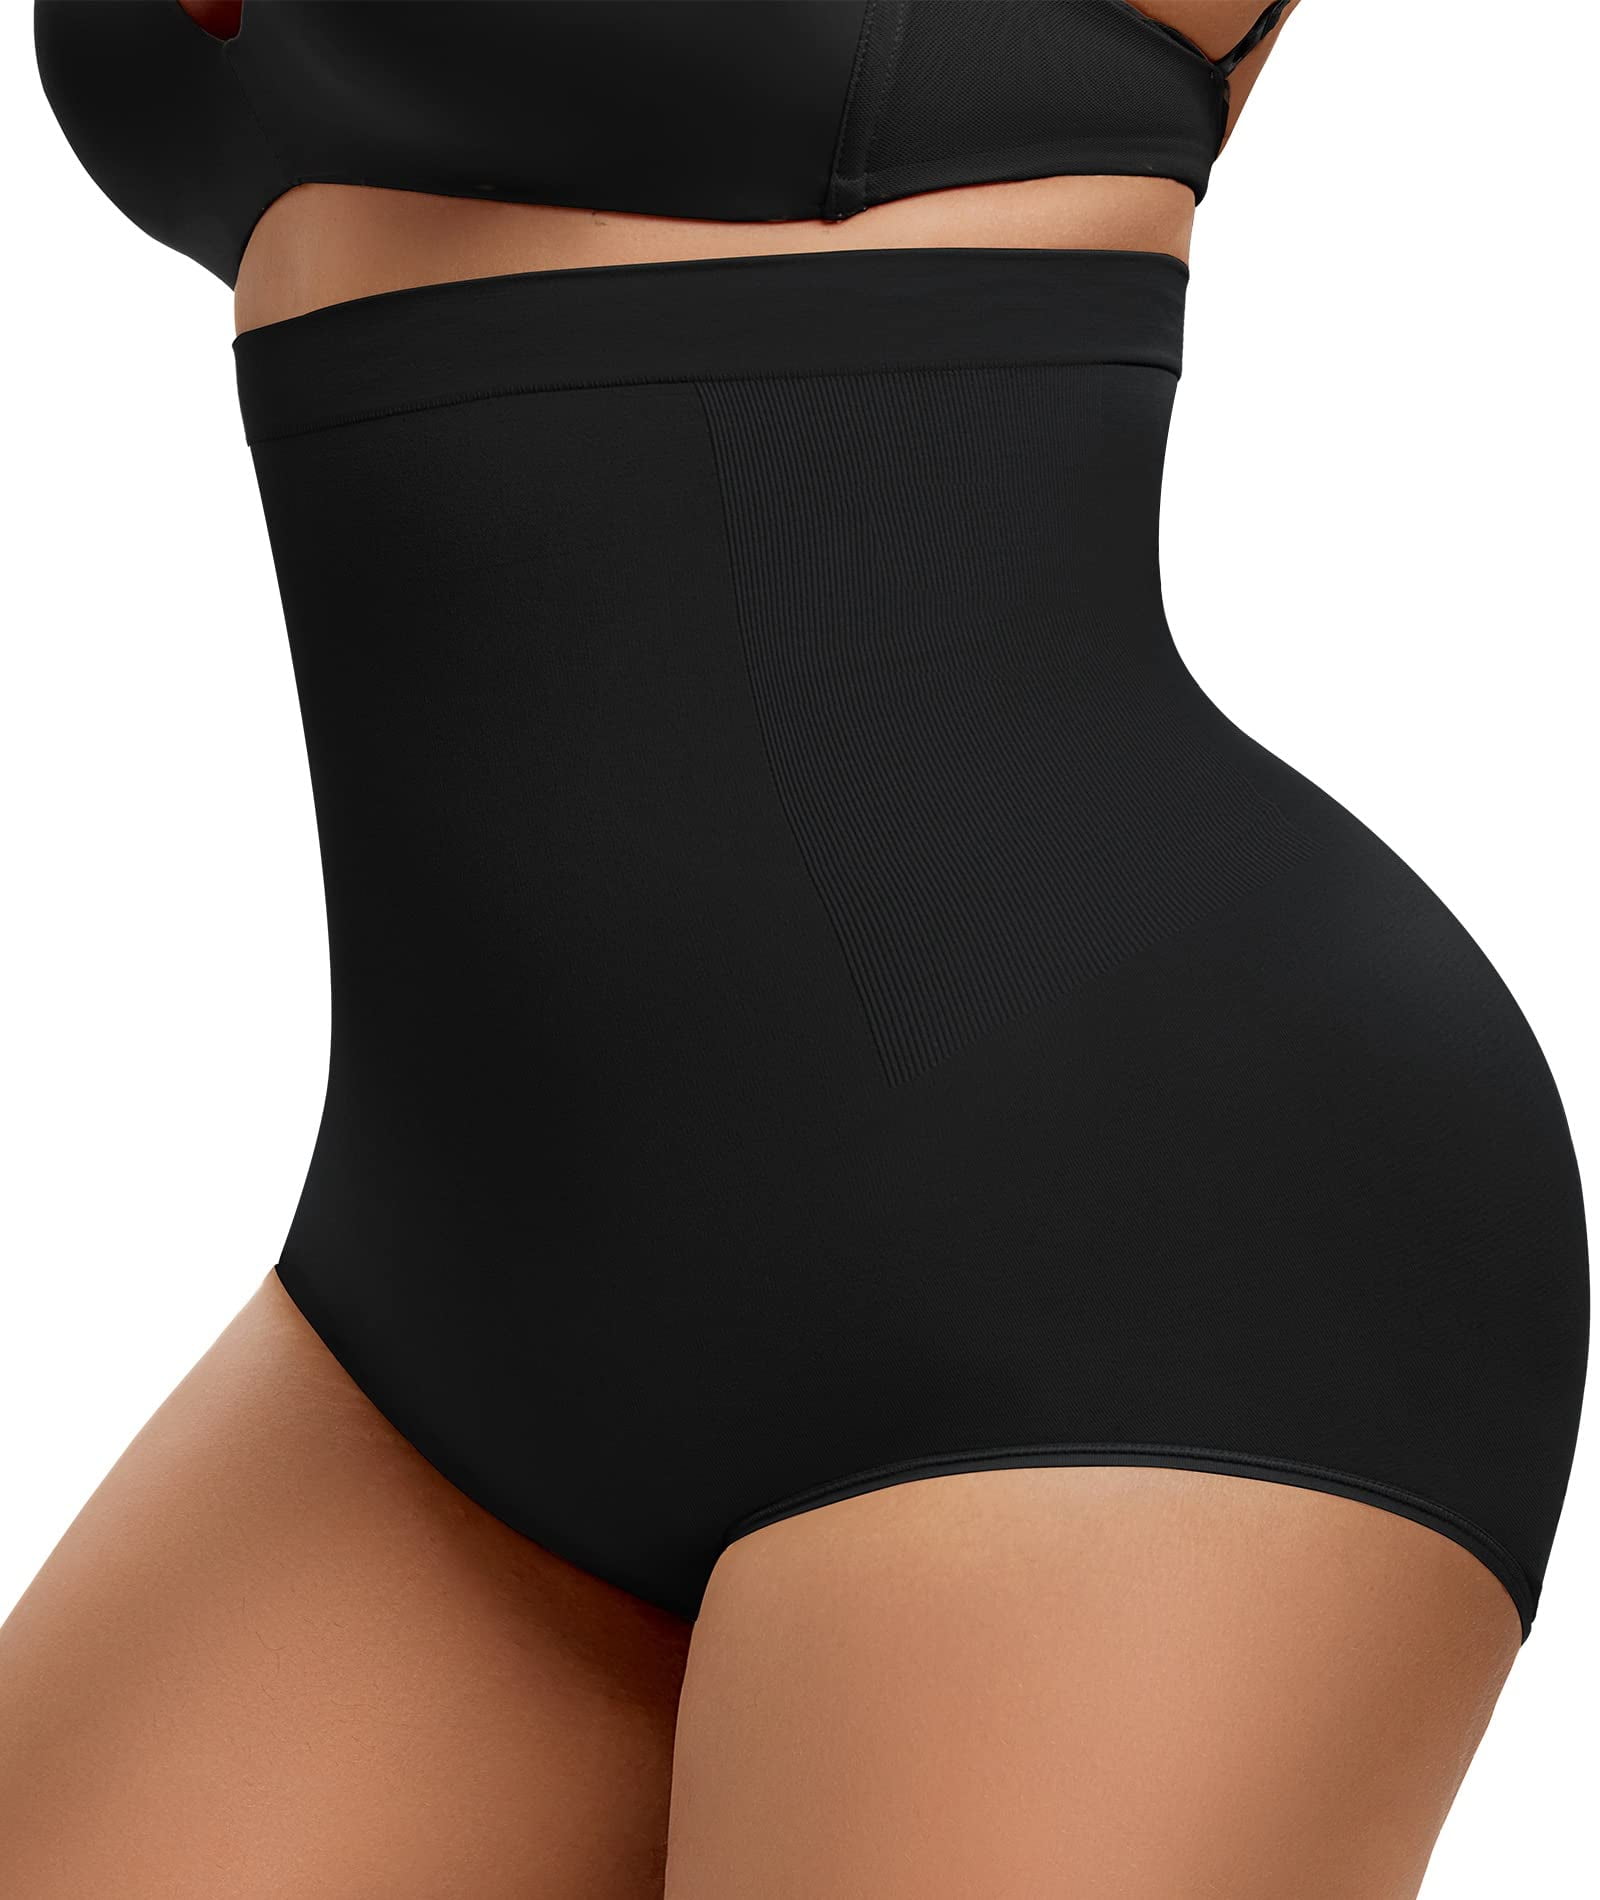 Butt Lifter Hip Hugger Women Girdle with Latex Sleeves Fajas Colombianas  Reductoras - Fiorella Shapewear